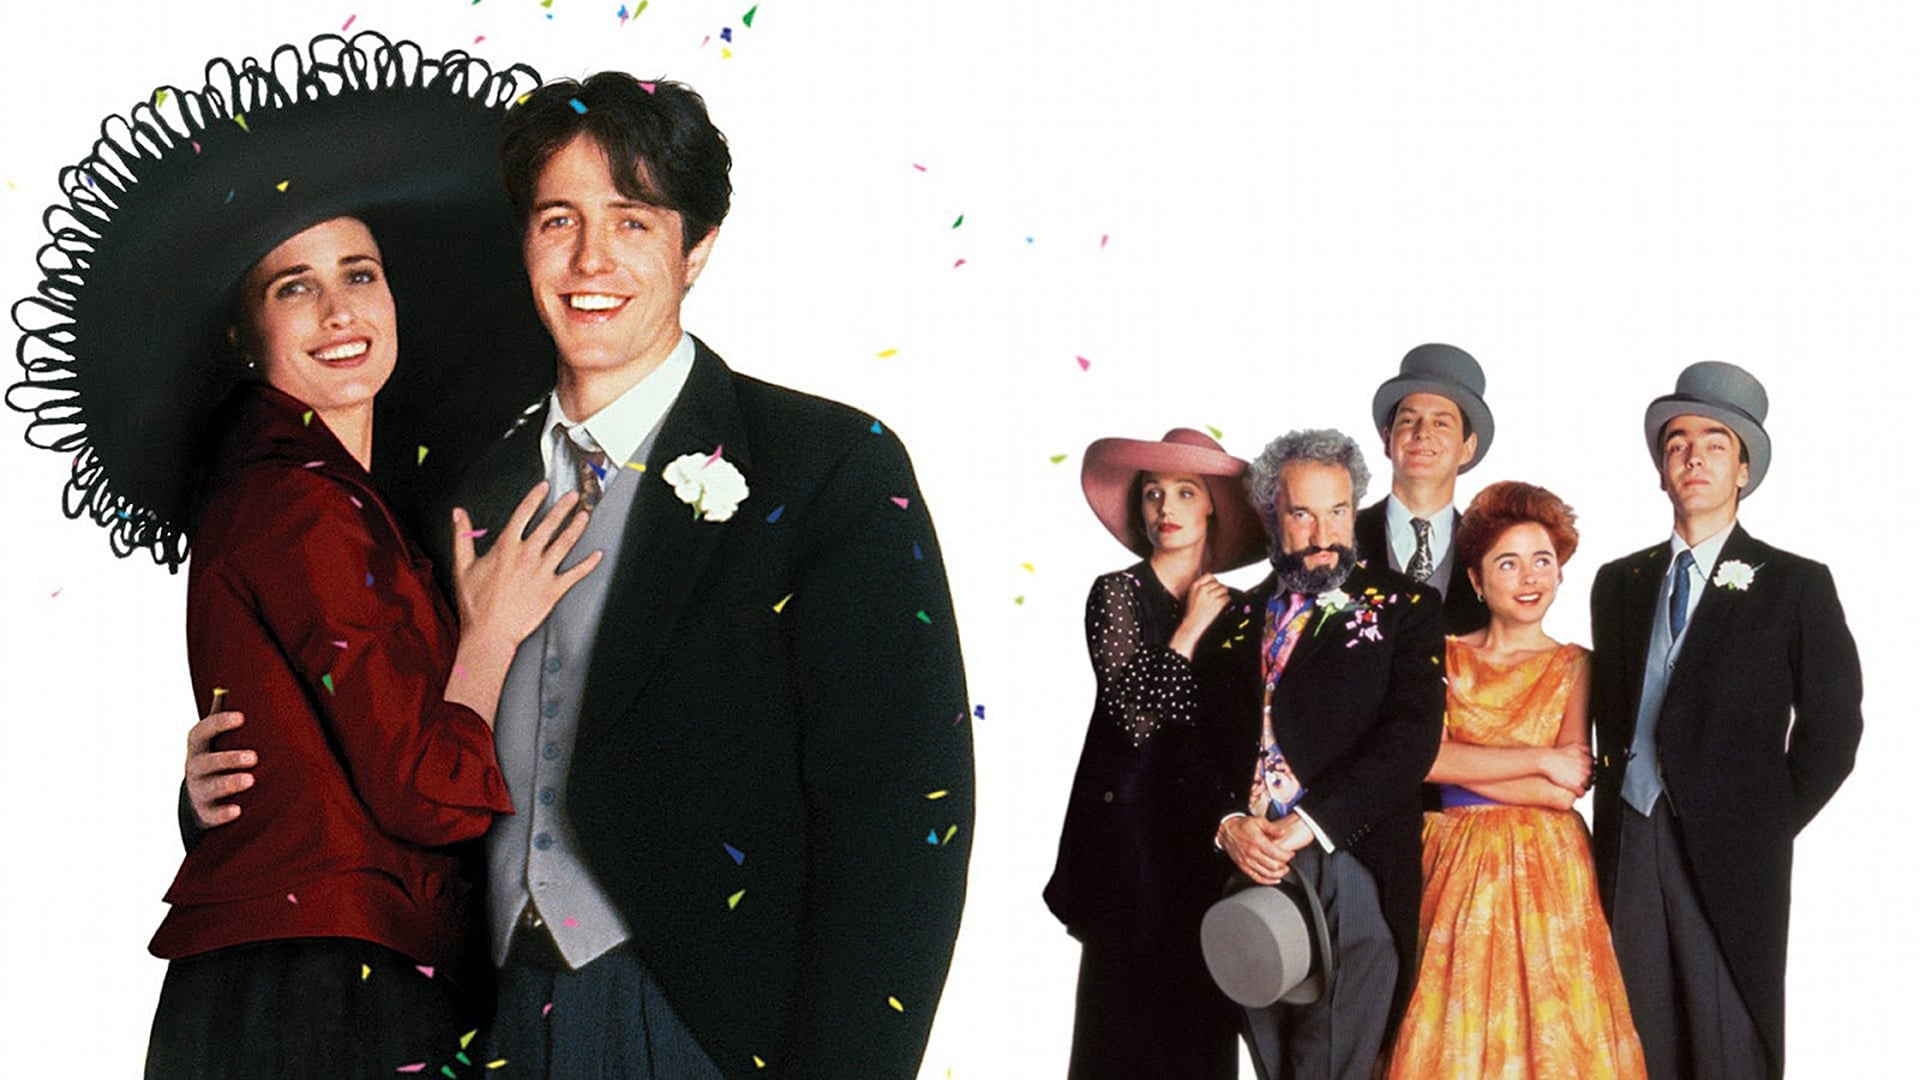 Four Weddings and a Funeral / Four Weddings and a Funeral (1994)